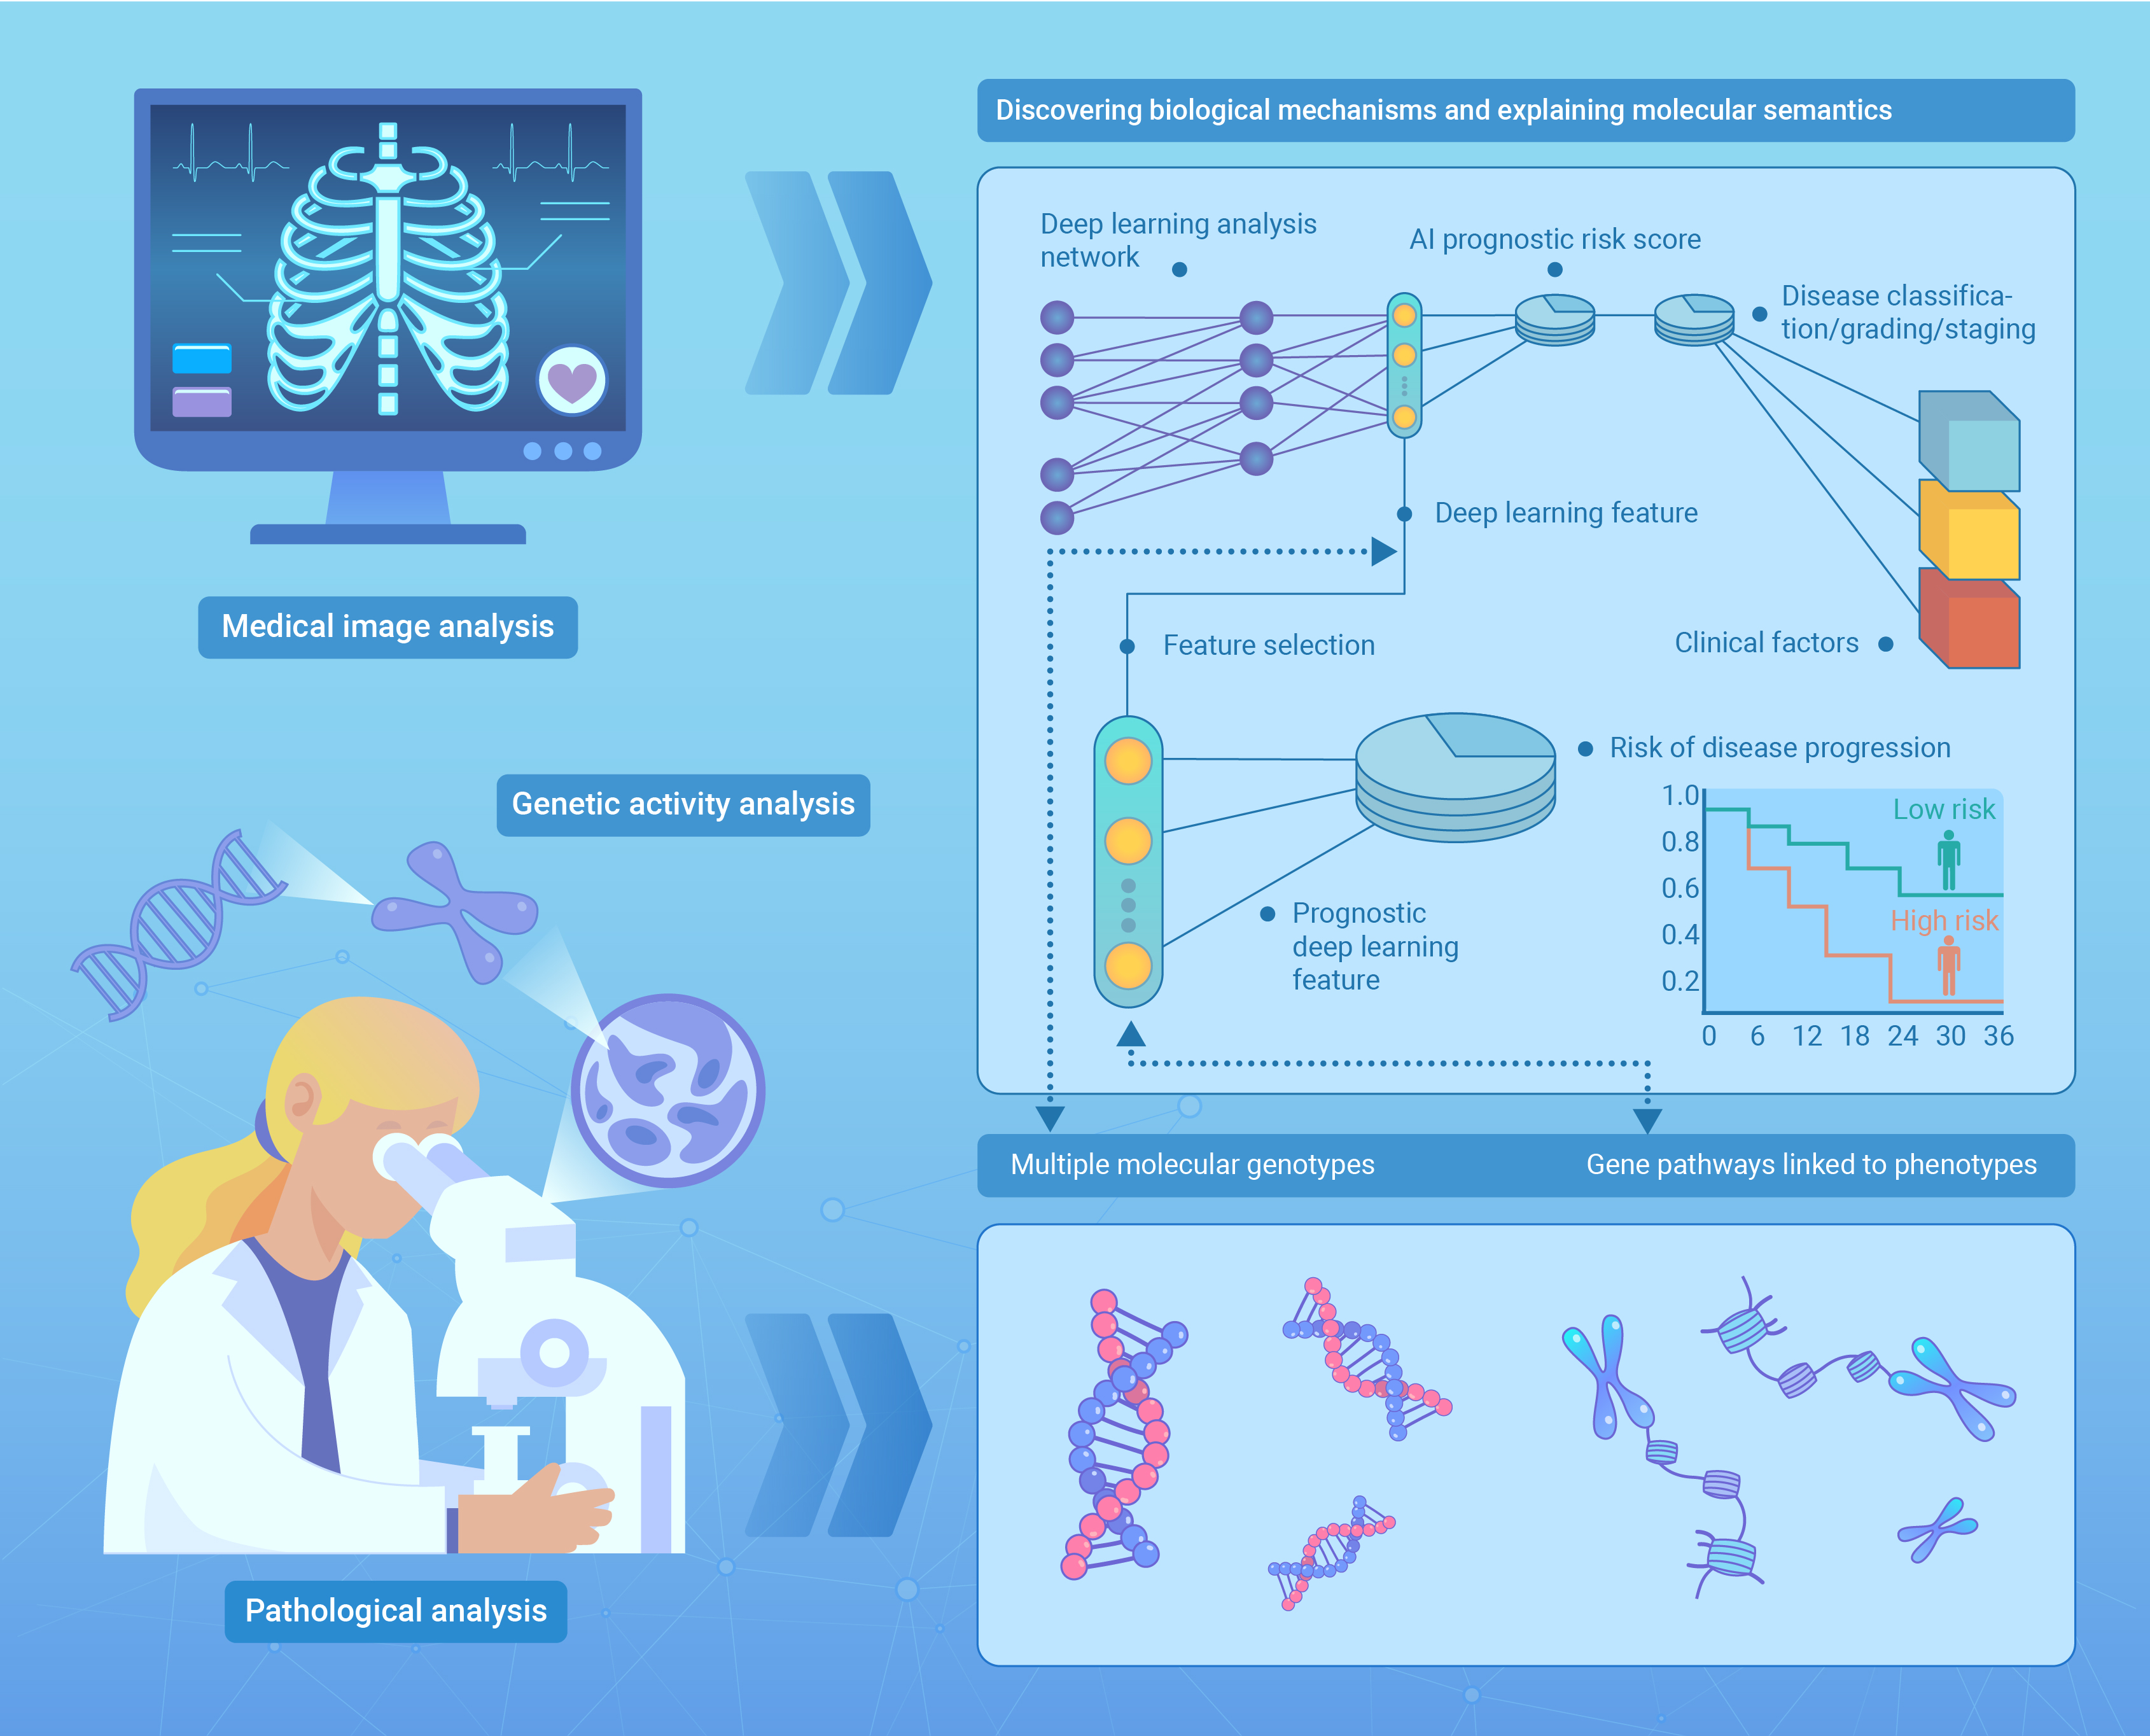 Artificial intelligence for medicine: Progress, challenges, and perspectives